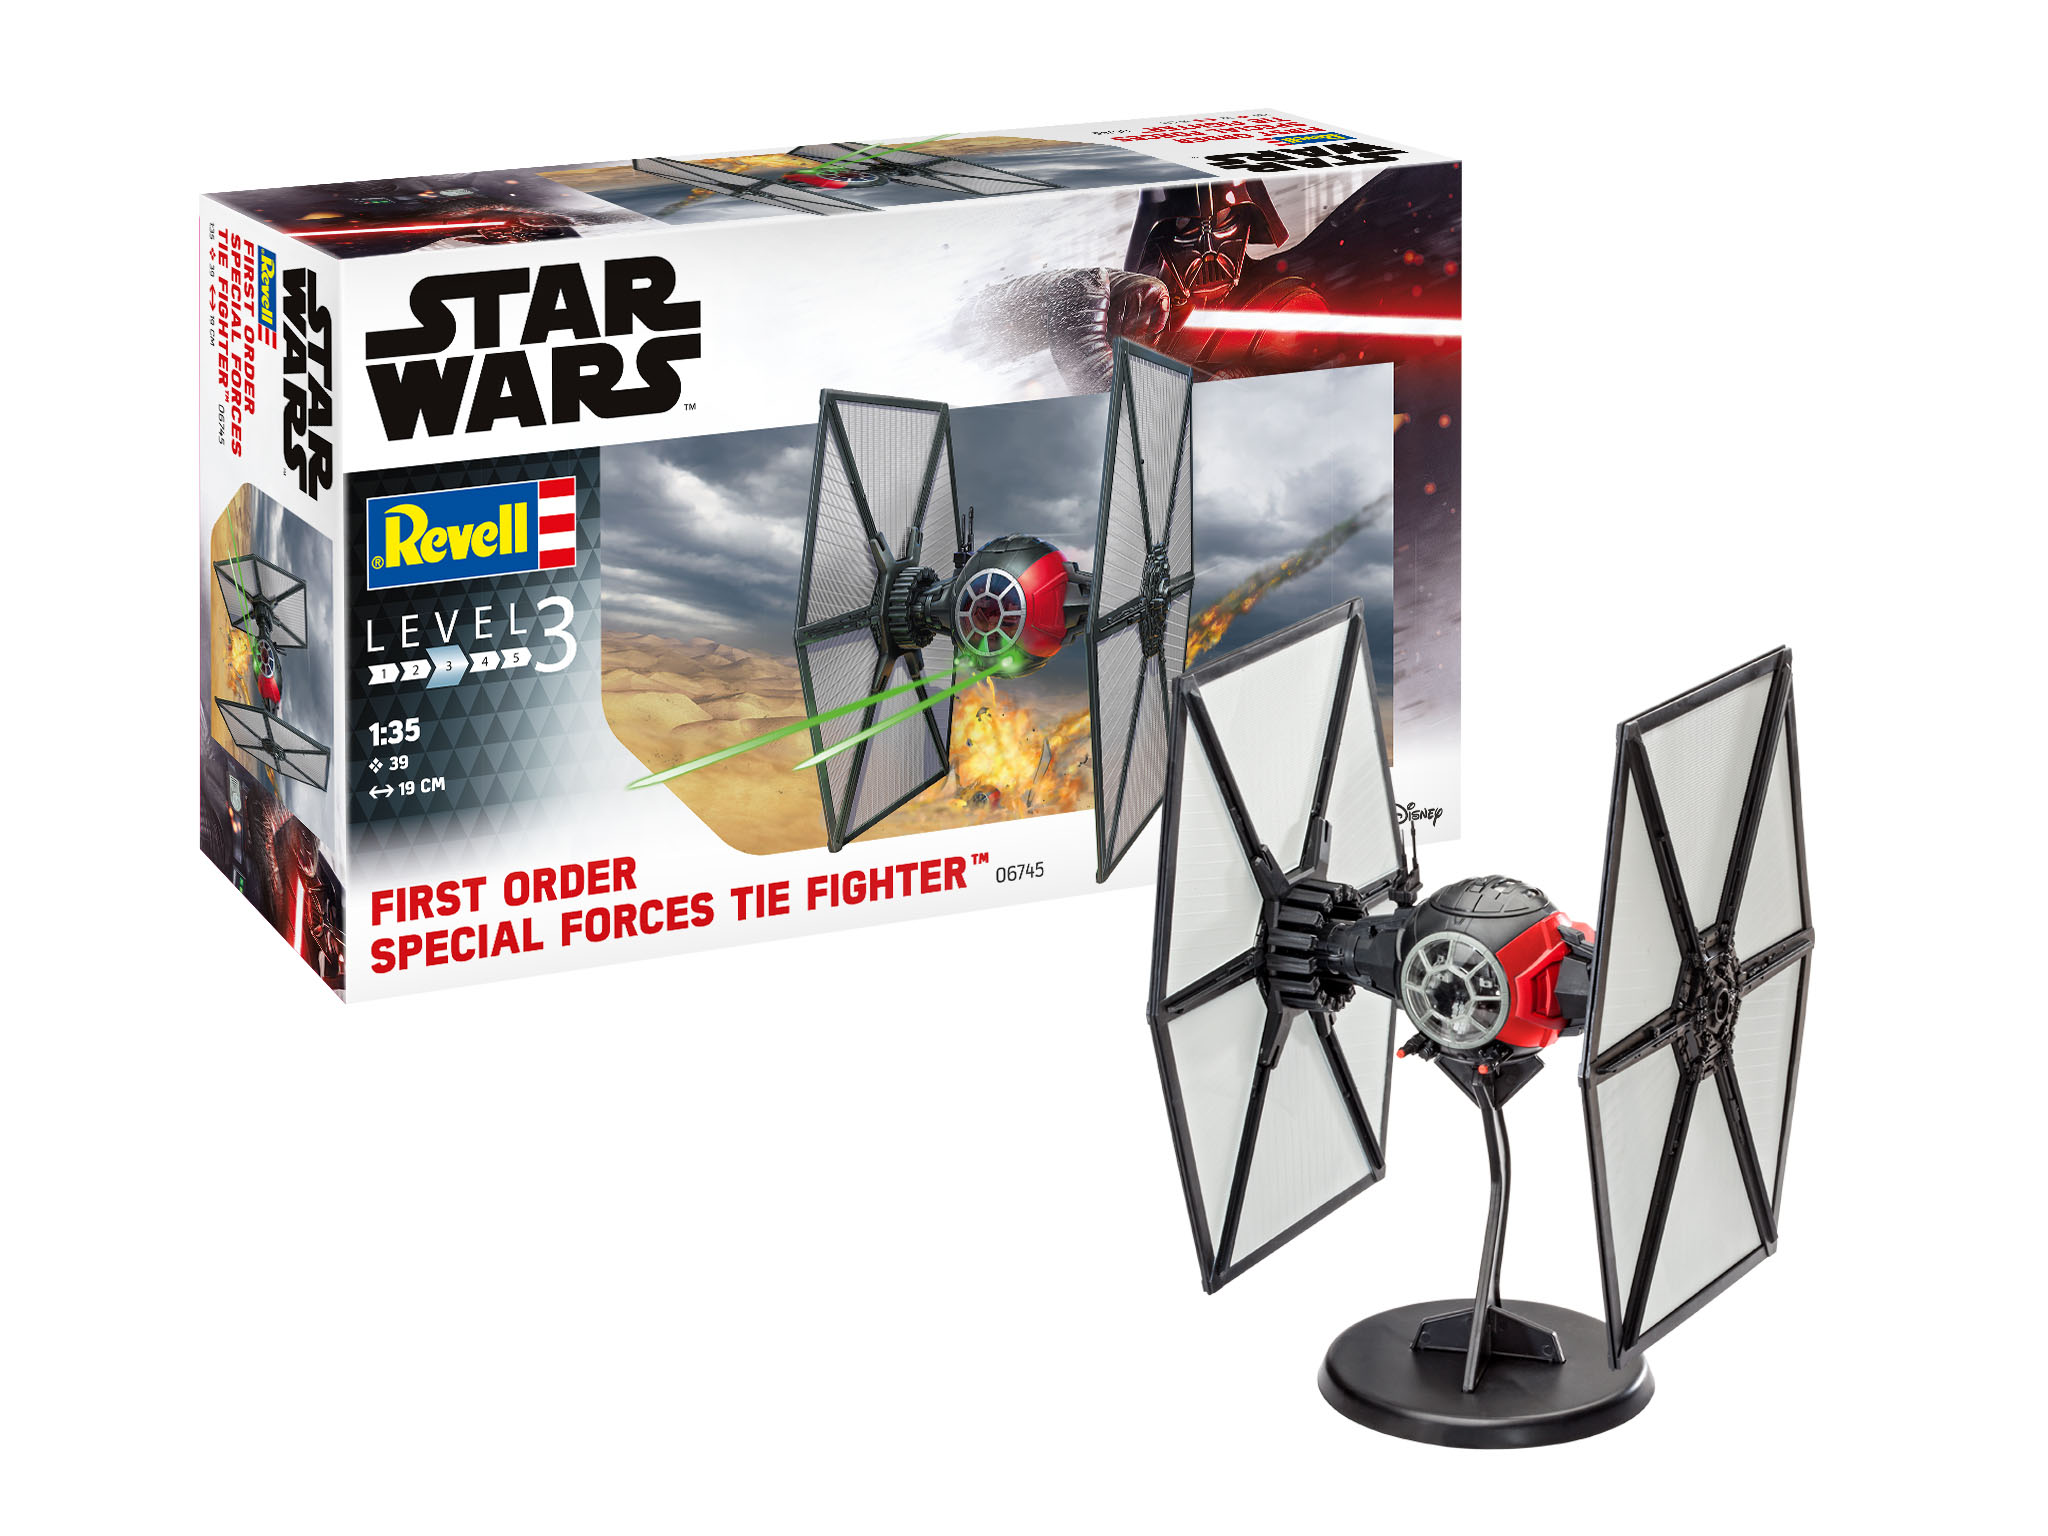 Revell Star Wars Special Forces TIE Fighter 1:35 bouwpakket